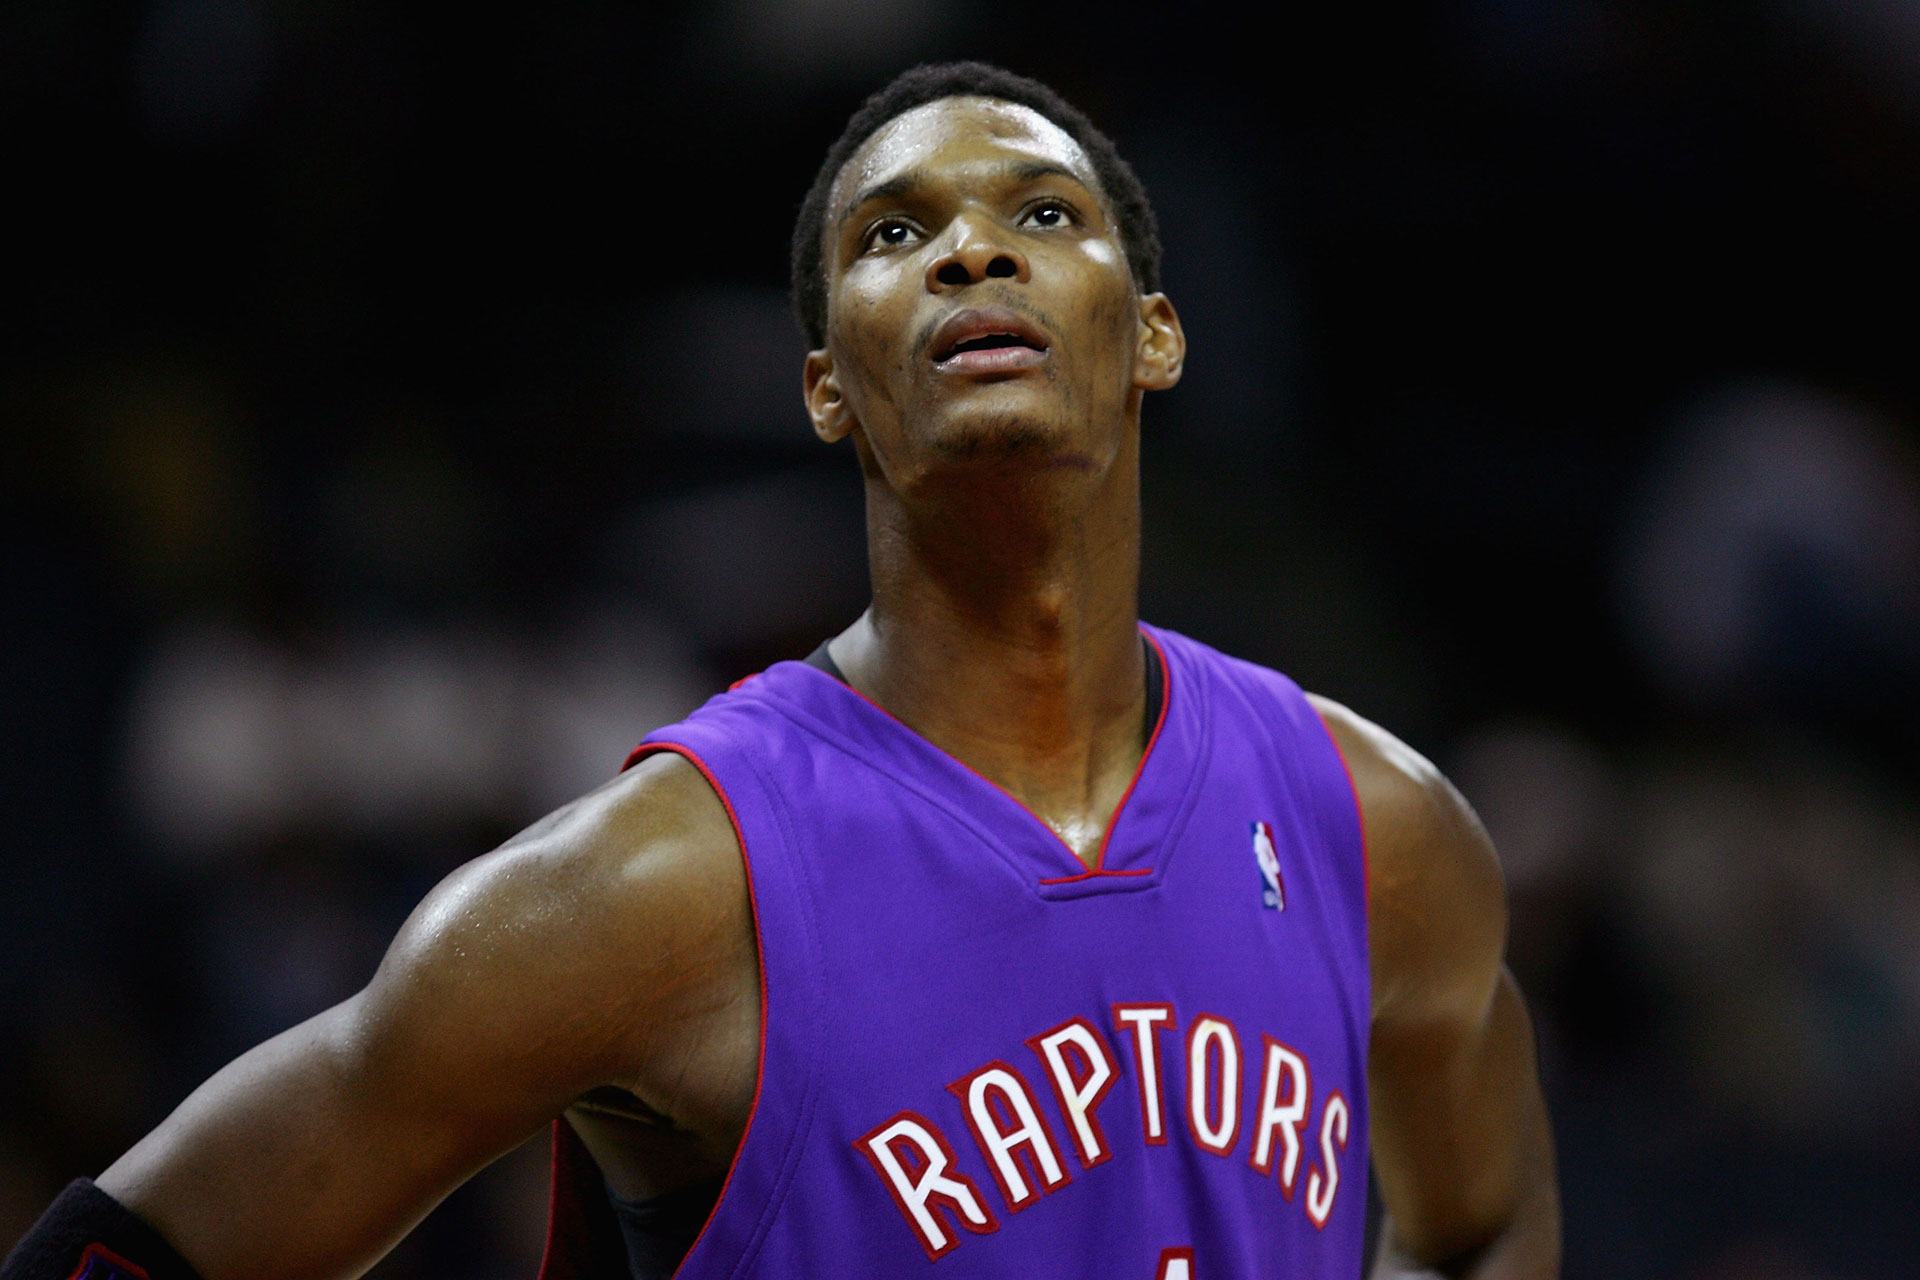 Chris Bosh #4 of the Toronto Raptors looks up during the game against the Charlotte Bobcats